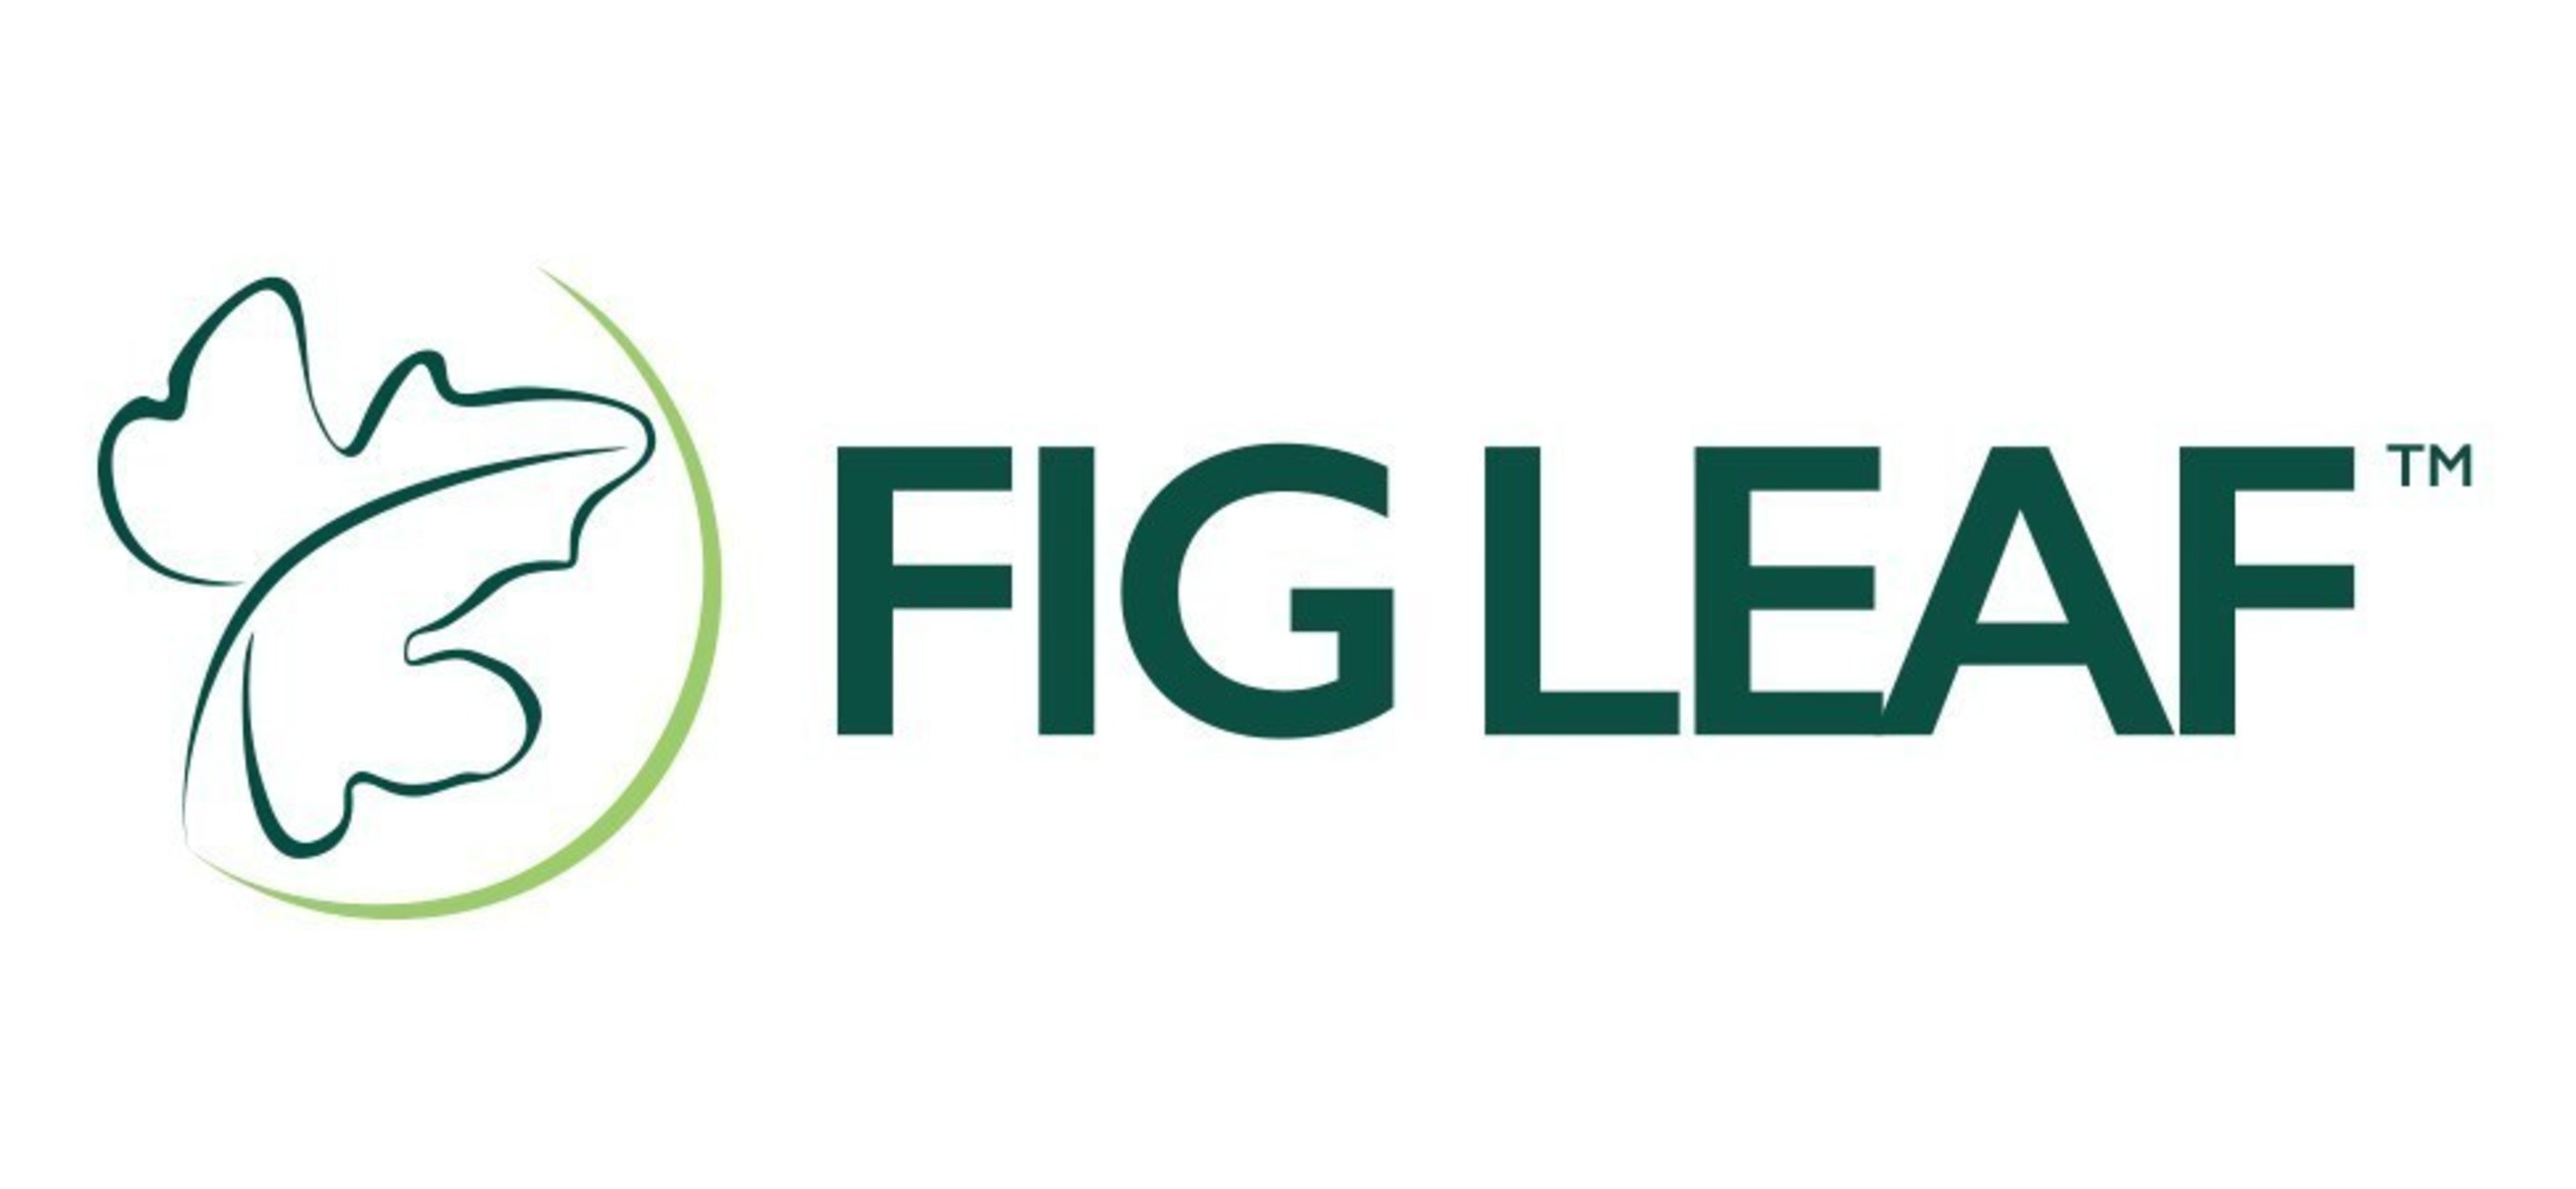 Fig Leaf Software is a full service digital agency and solutions integrator with 20 years of experience in marketing, design, web and mobile development, software sales and web professional training.  Fig Leaf is a certified Service Disabled Veteran Owned Small Business (SDVOSB). Learn more at www.figleaf.com